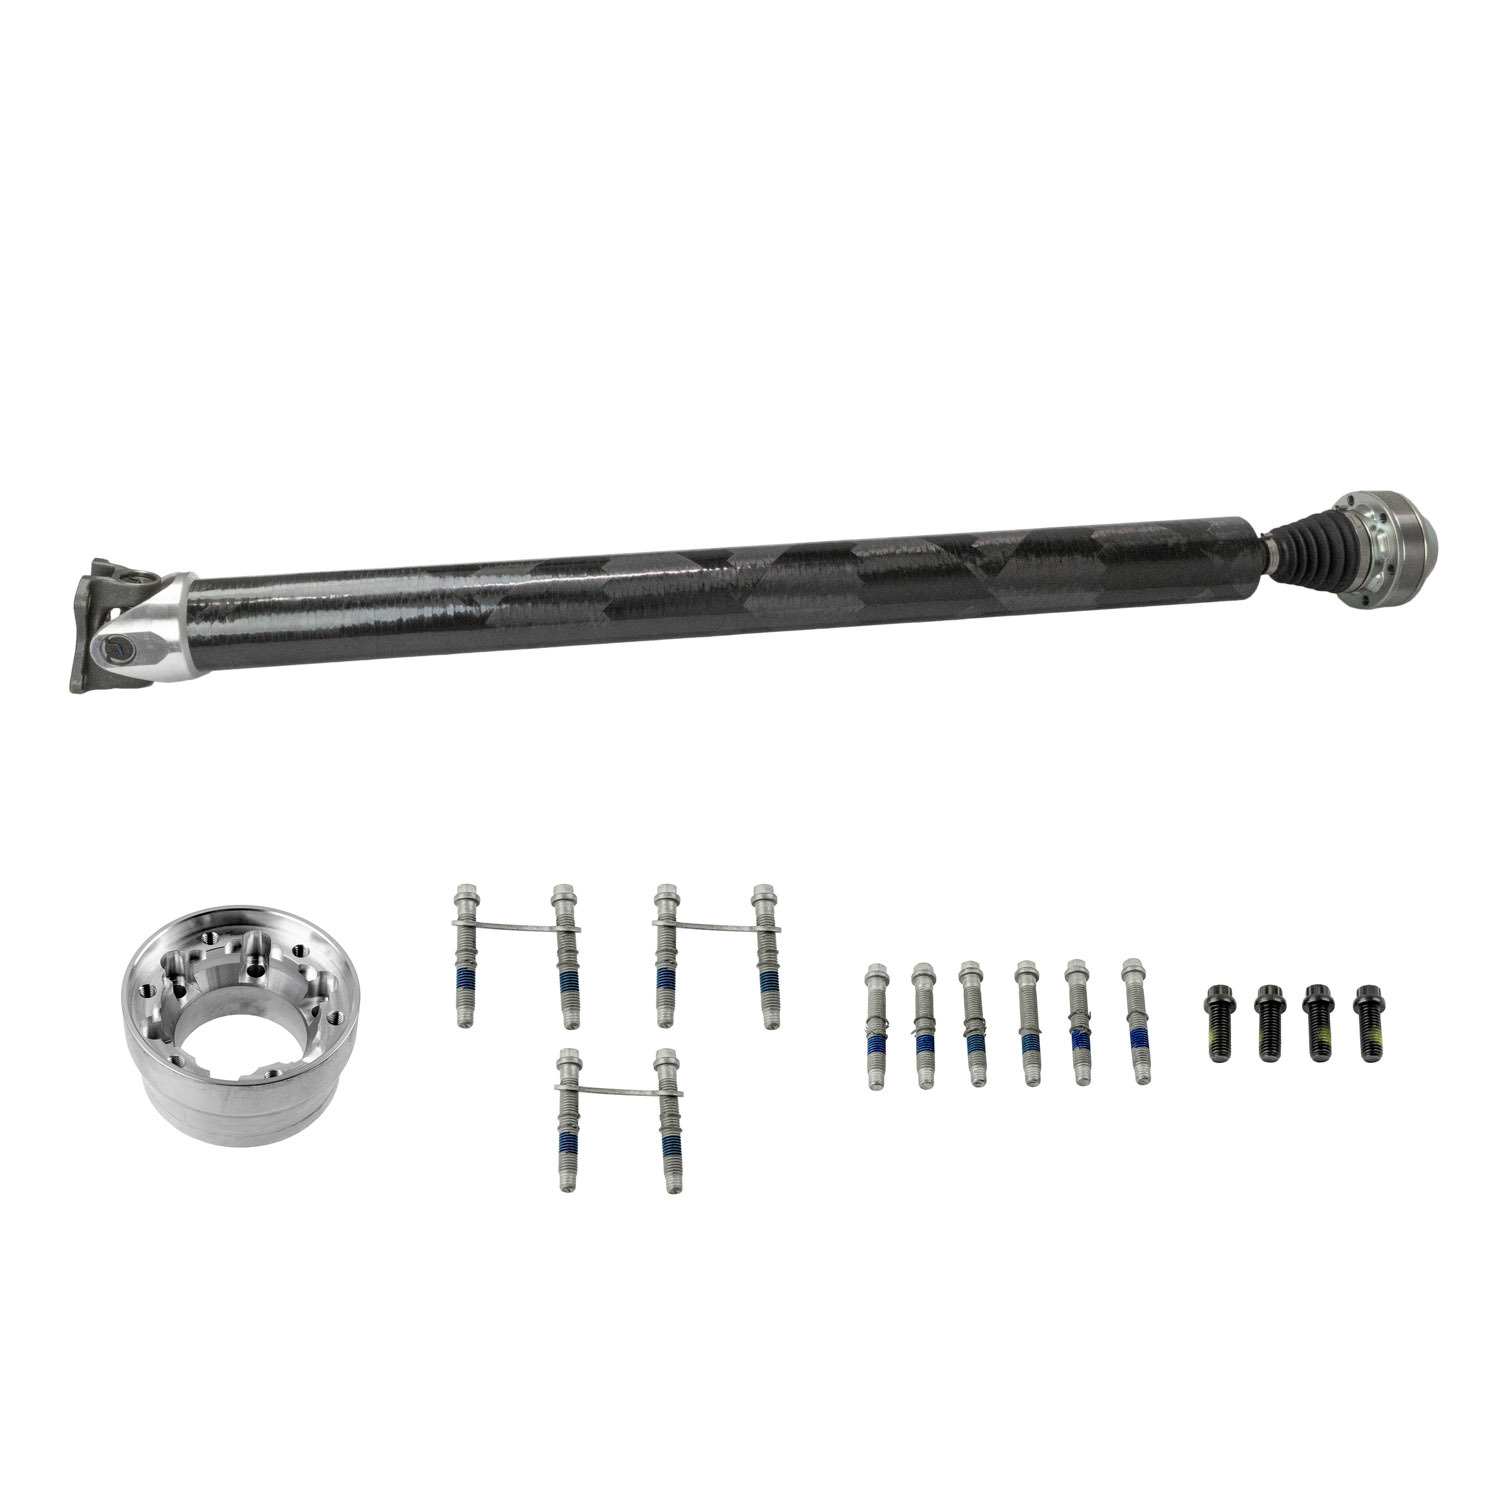 Richmond Gear 45-10210 Drive Shaft, 3.31 in Diameter, Carbon Fiber, Ford 8.8 in, Ford Mustang 2005-10, Each